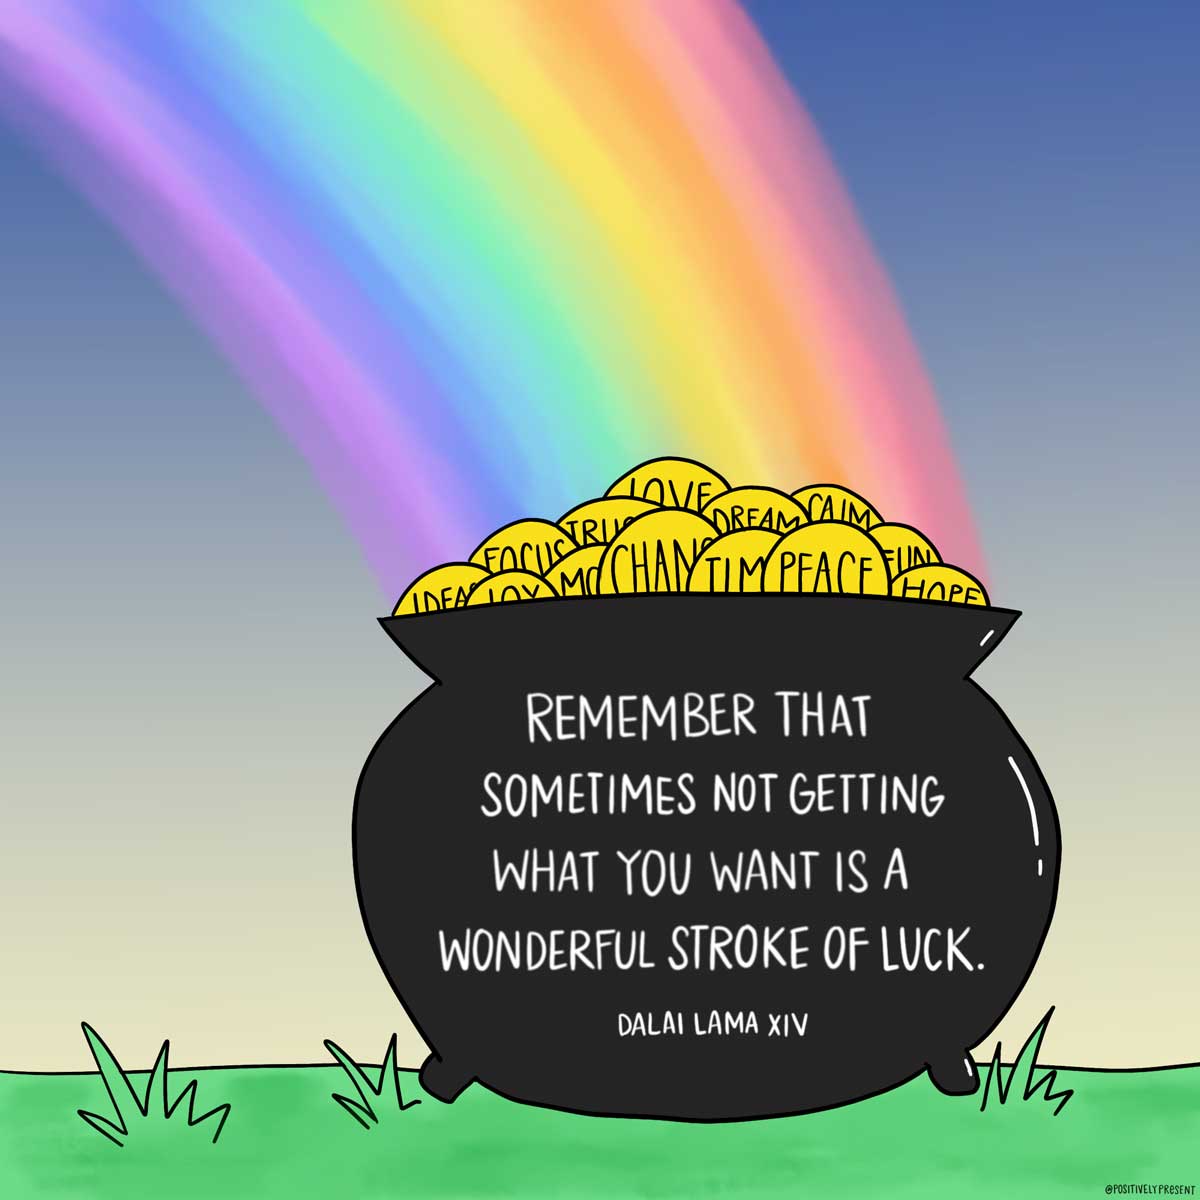 rainbow with pot of gold says not getting what you want is a stroke of luck.